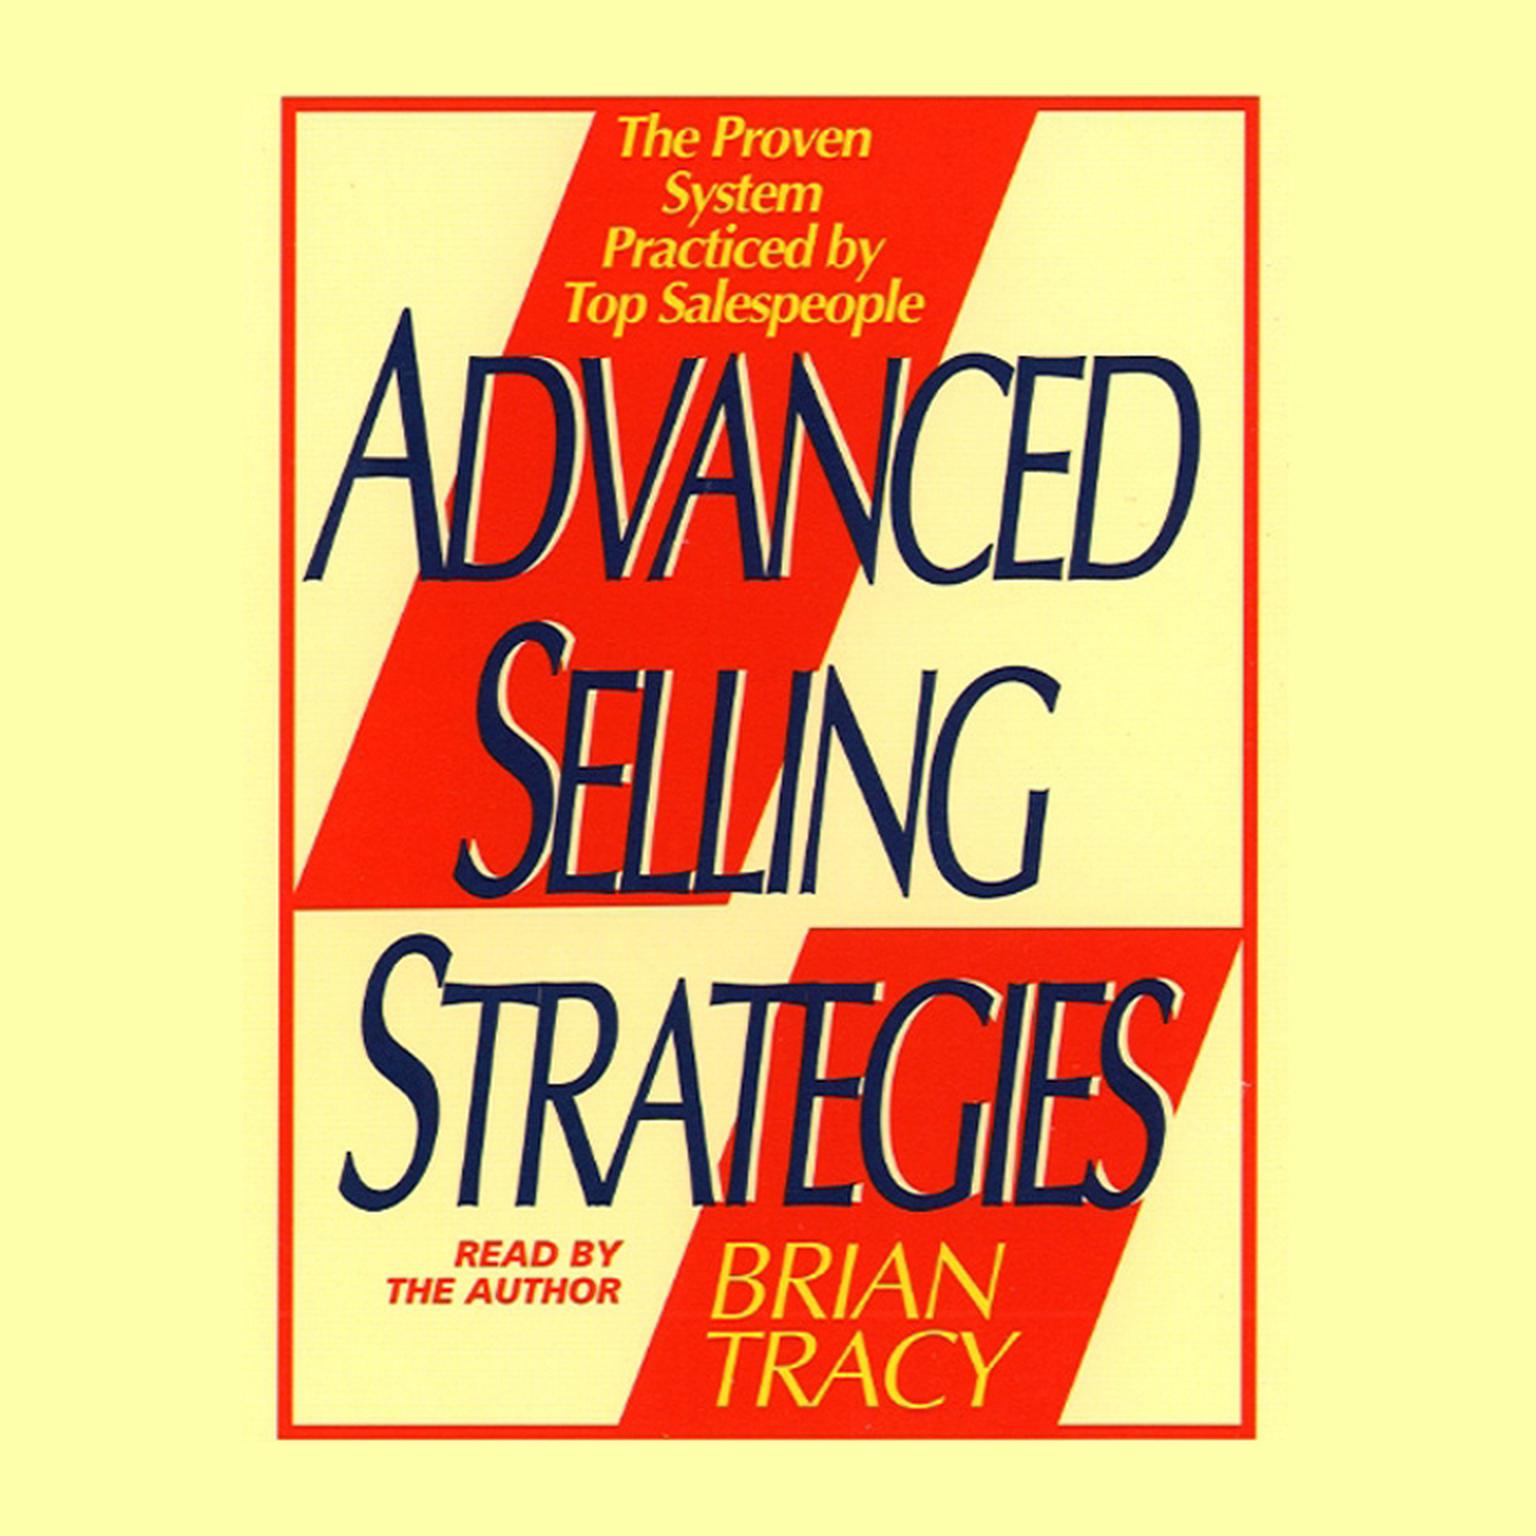 Advanced Selling Strategies (Abridged): The Proven System Practiced by Top Salespeople Audiobook, by Brian Tracy